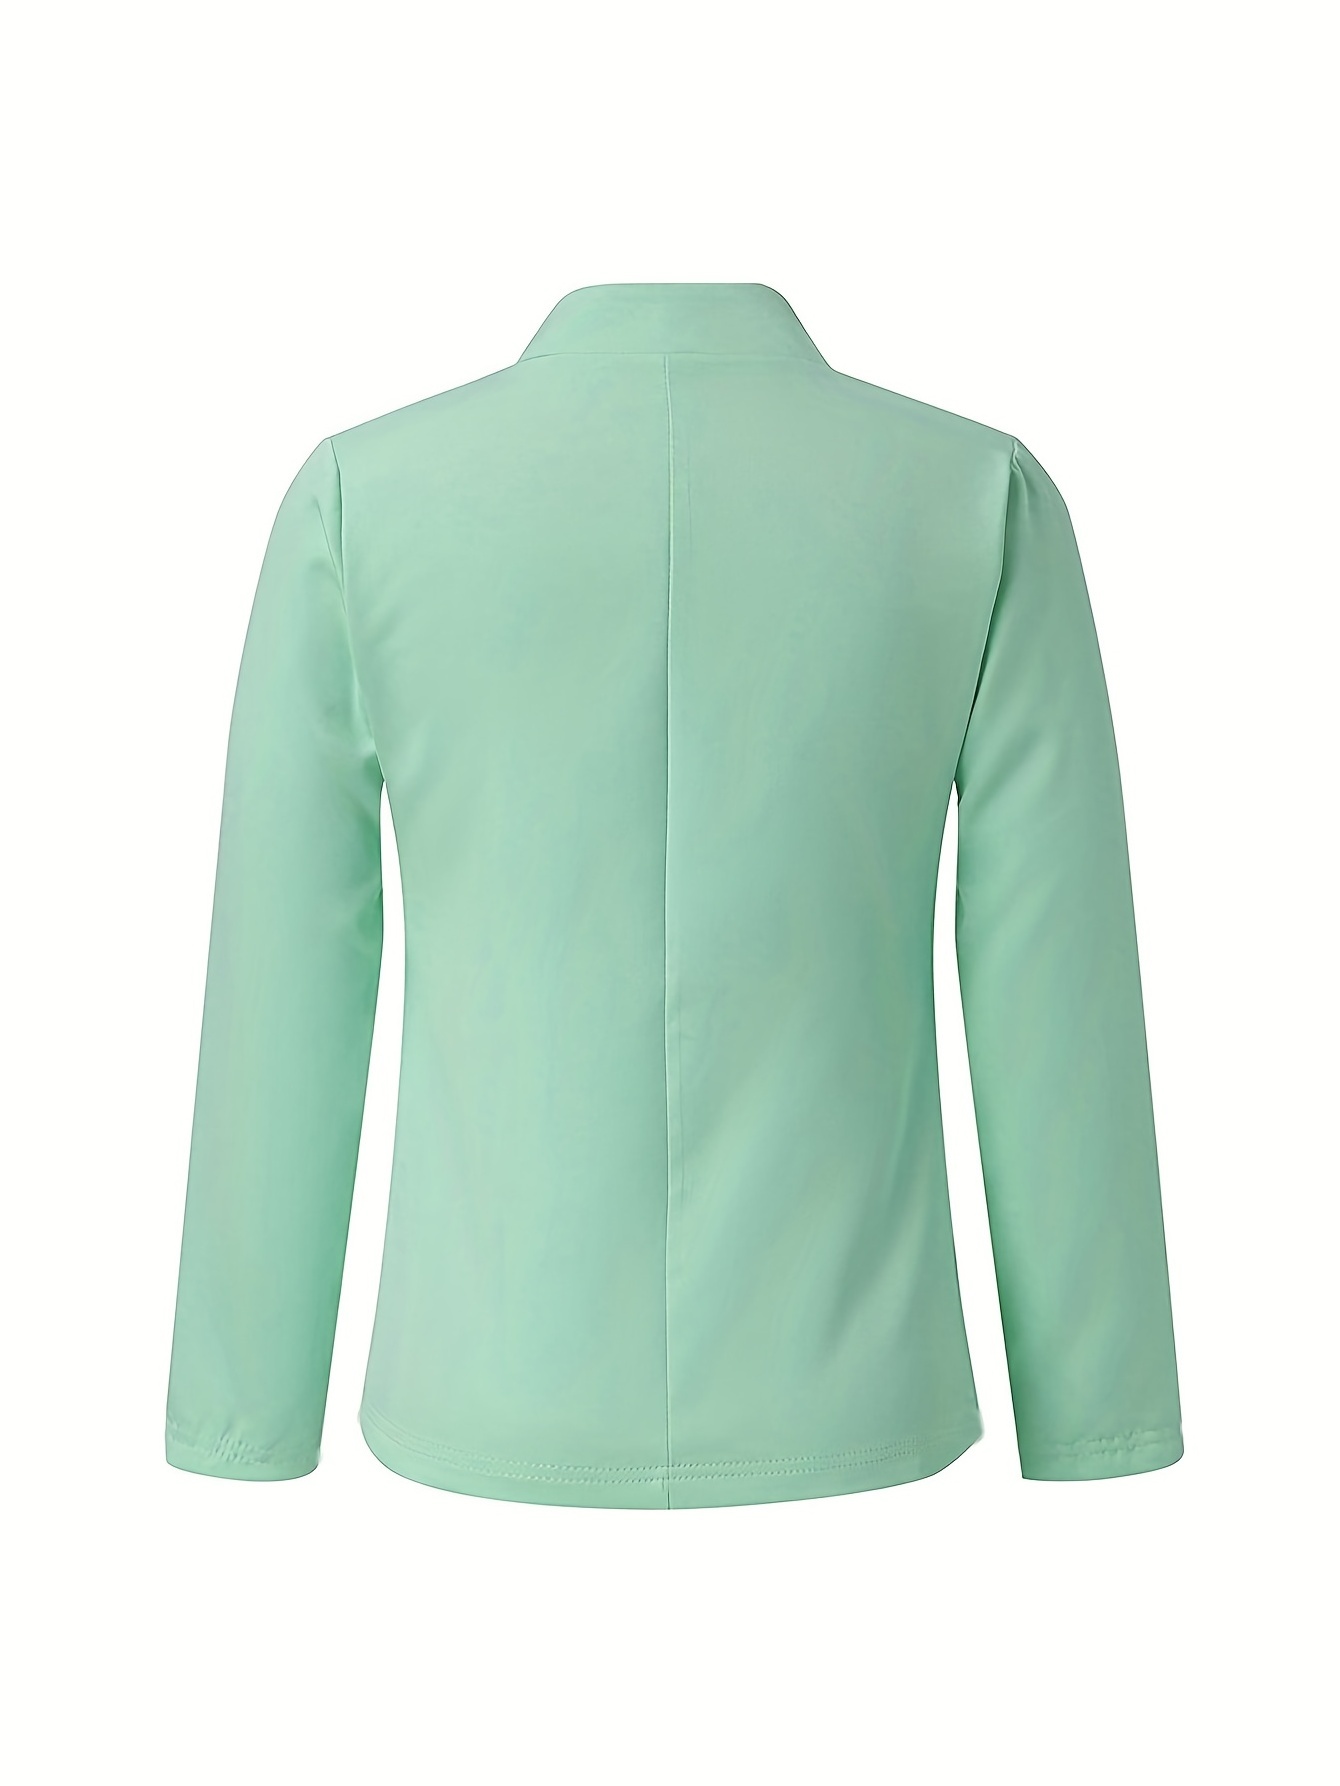 Long Sleeve Open Front Jacket, Solid Outwear For Business, Every Day, Women's Clothing